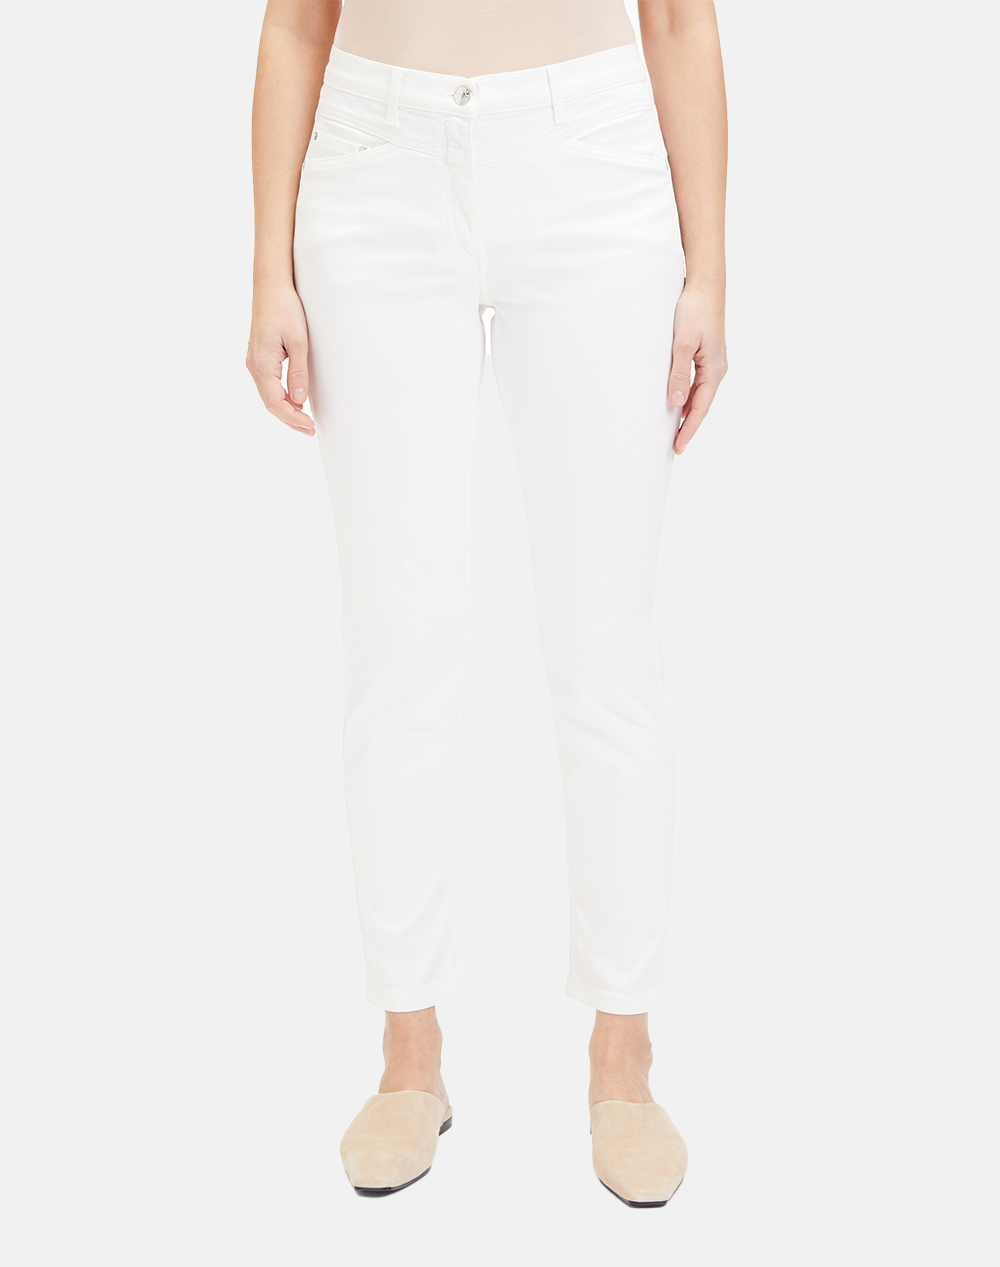 BETTY BARCLAY Hose lang 6818/2518-1014 OffWhite